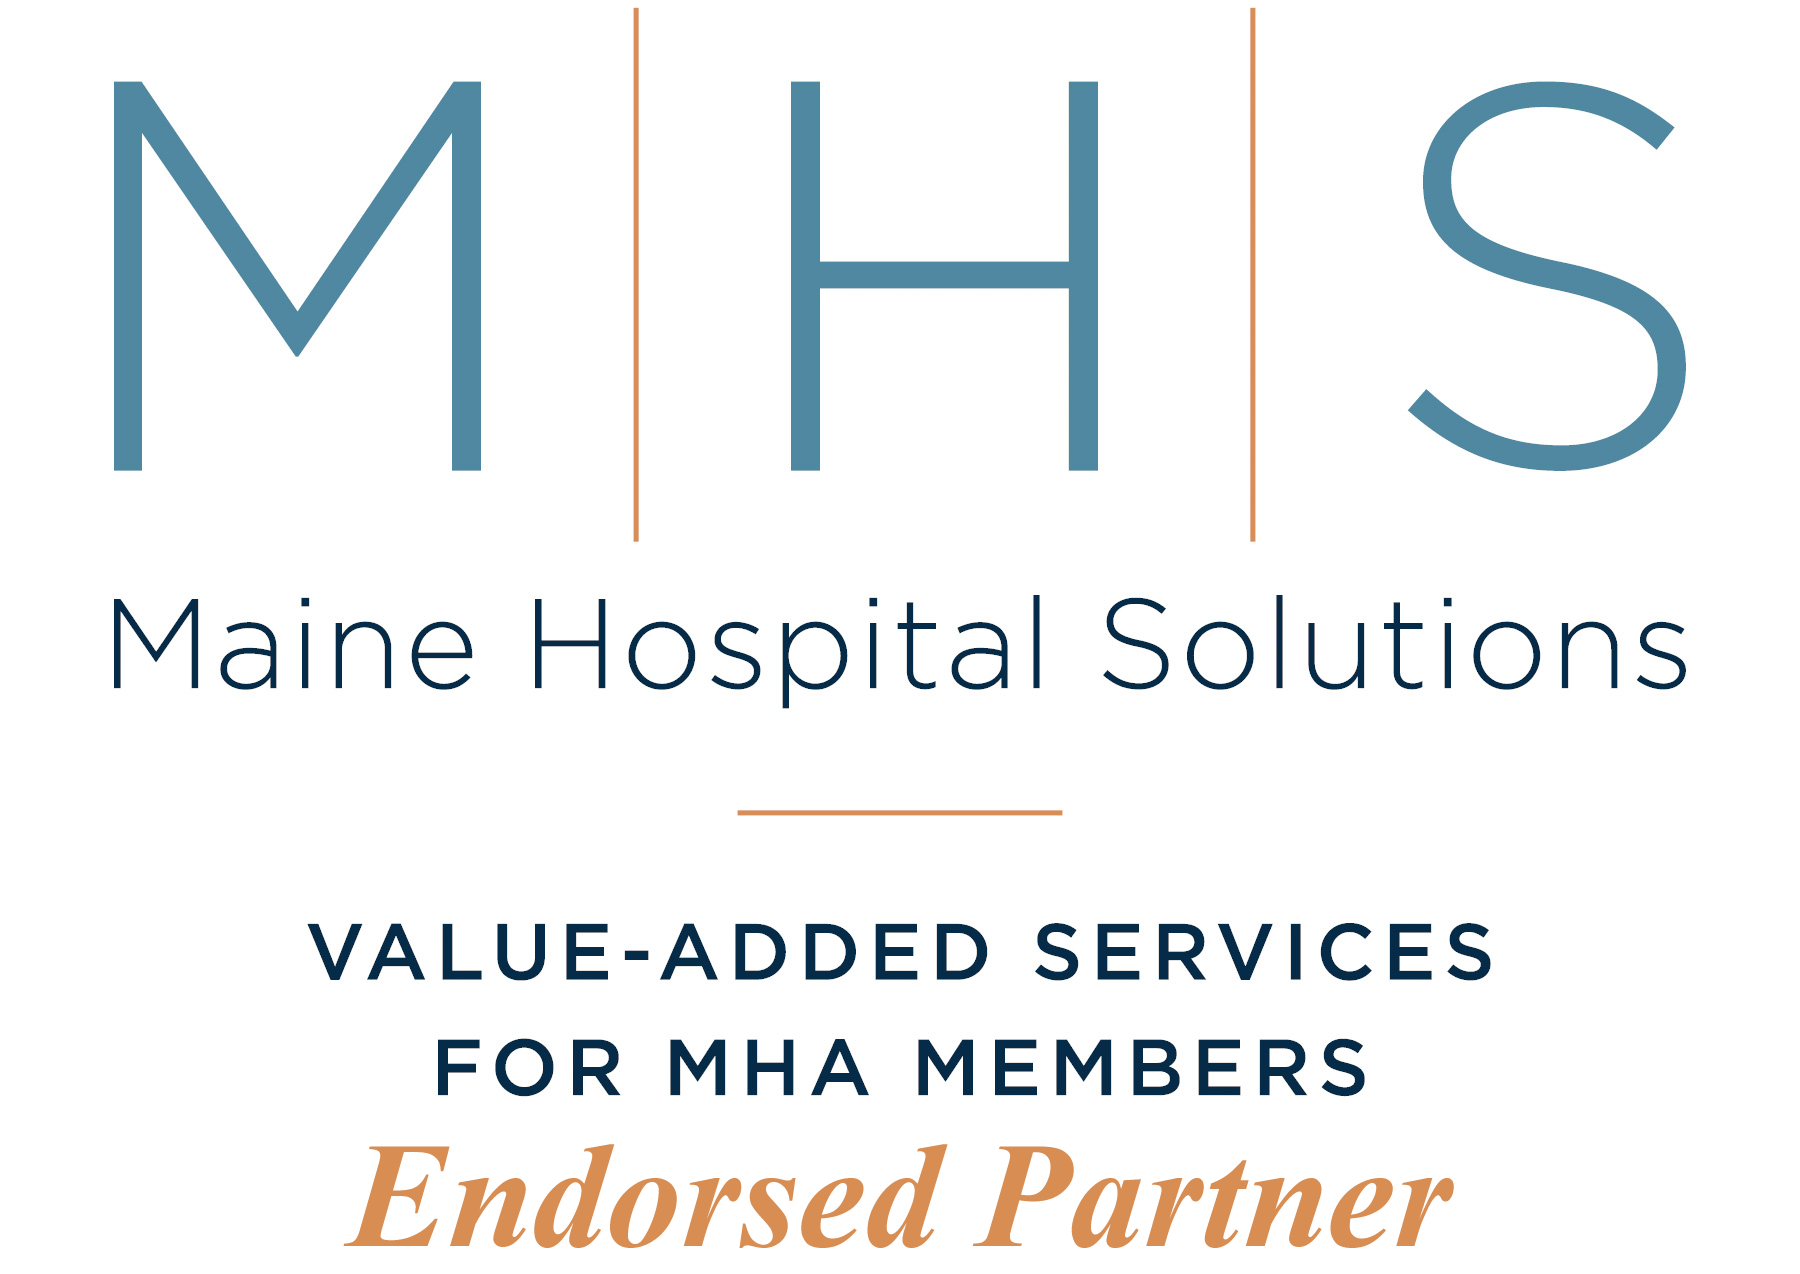 Maine Hospital Association has engaged HWL's extensive locum agency network to meet their temporary physician and advance practice staffing needs.